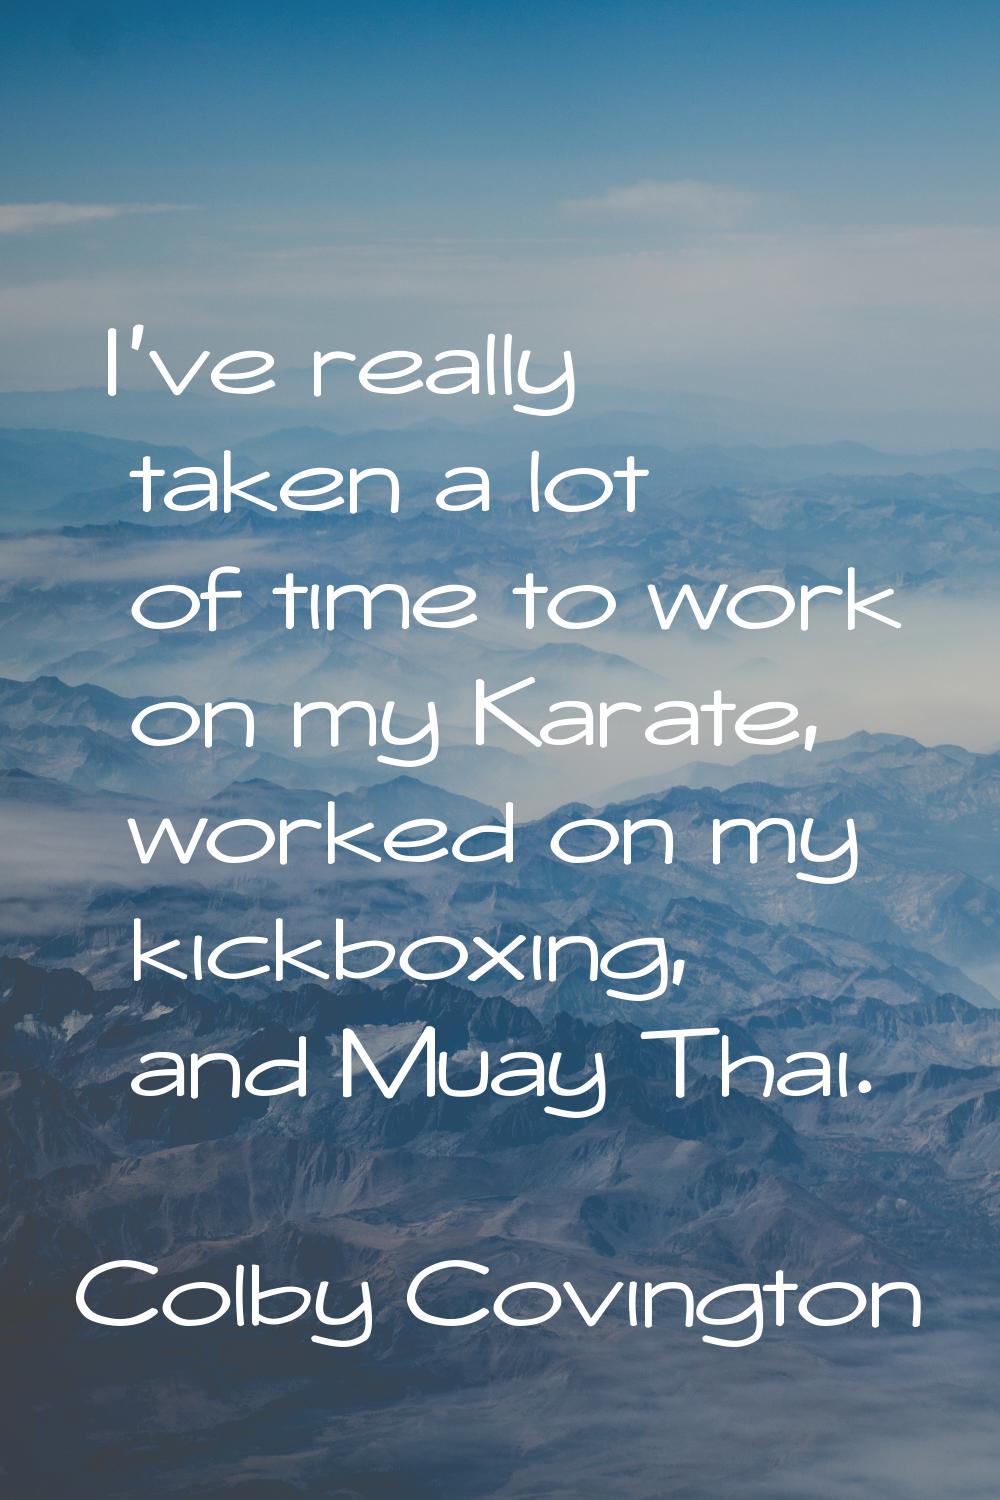 I've really taken a lot of time to work on my Karate, worked on my kickboxing, and Muay Thai.